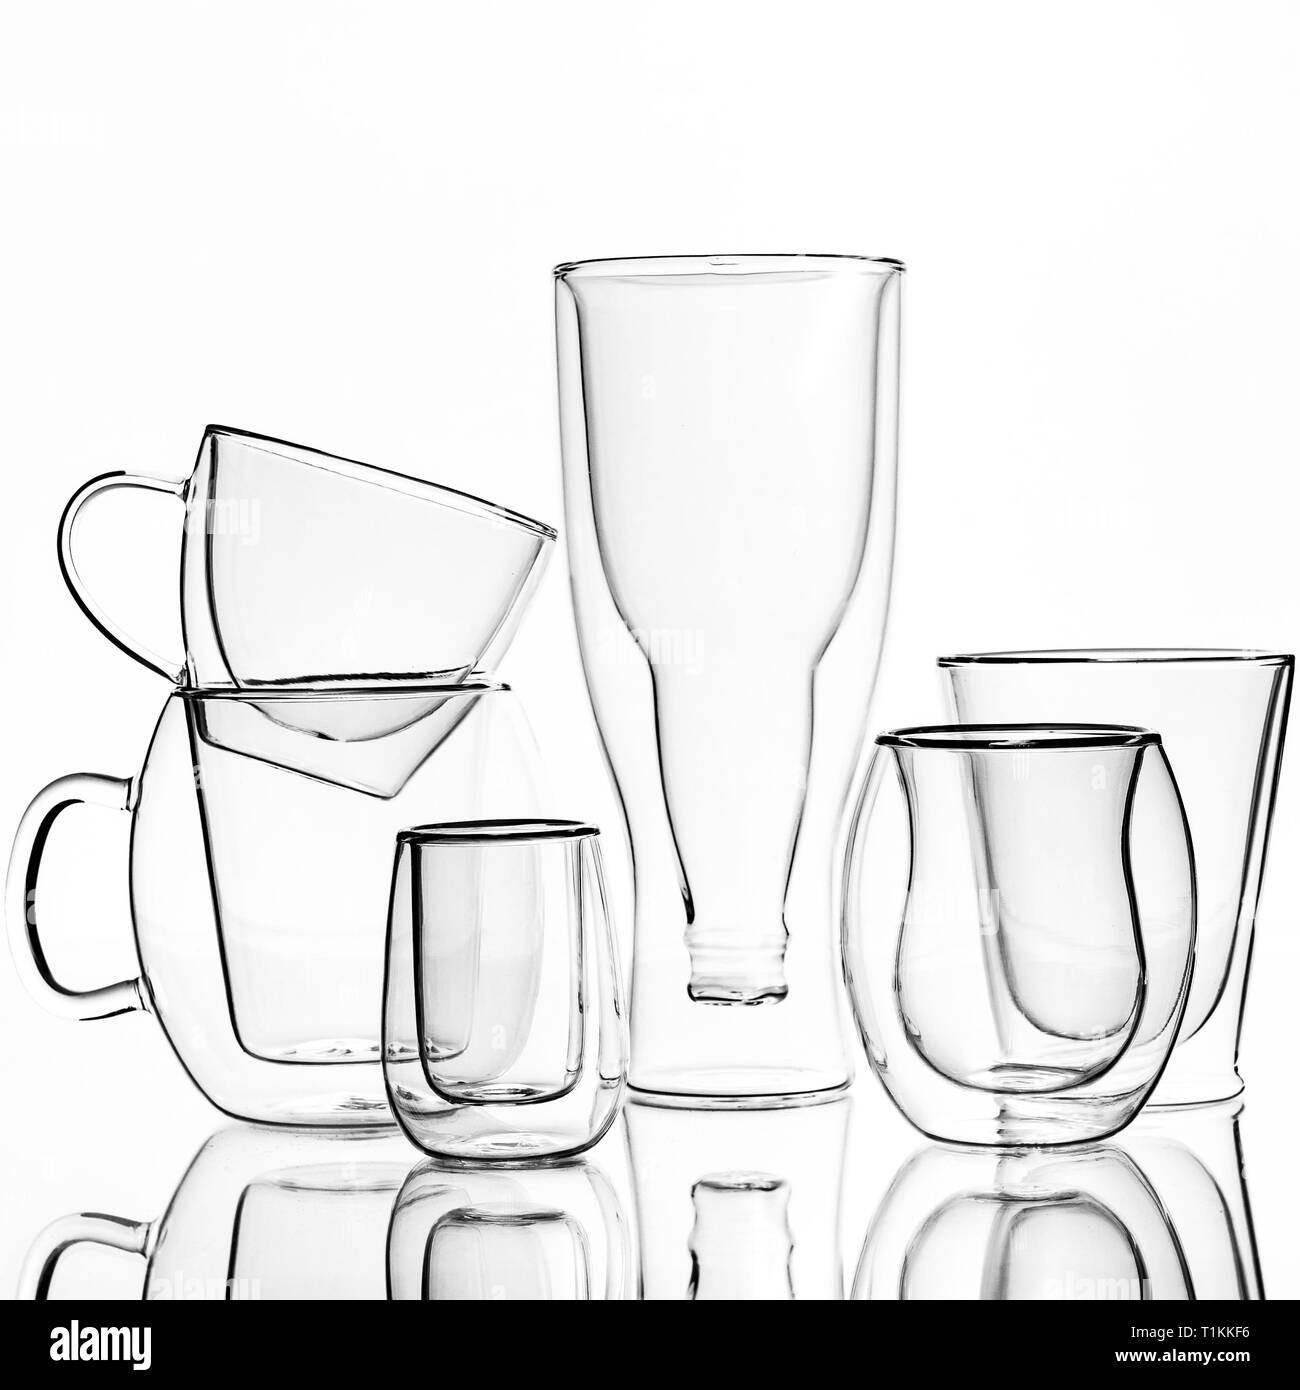 Glasses and cups with double walls, on a white background. Isolated. Stock Photo